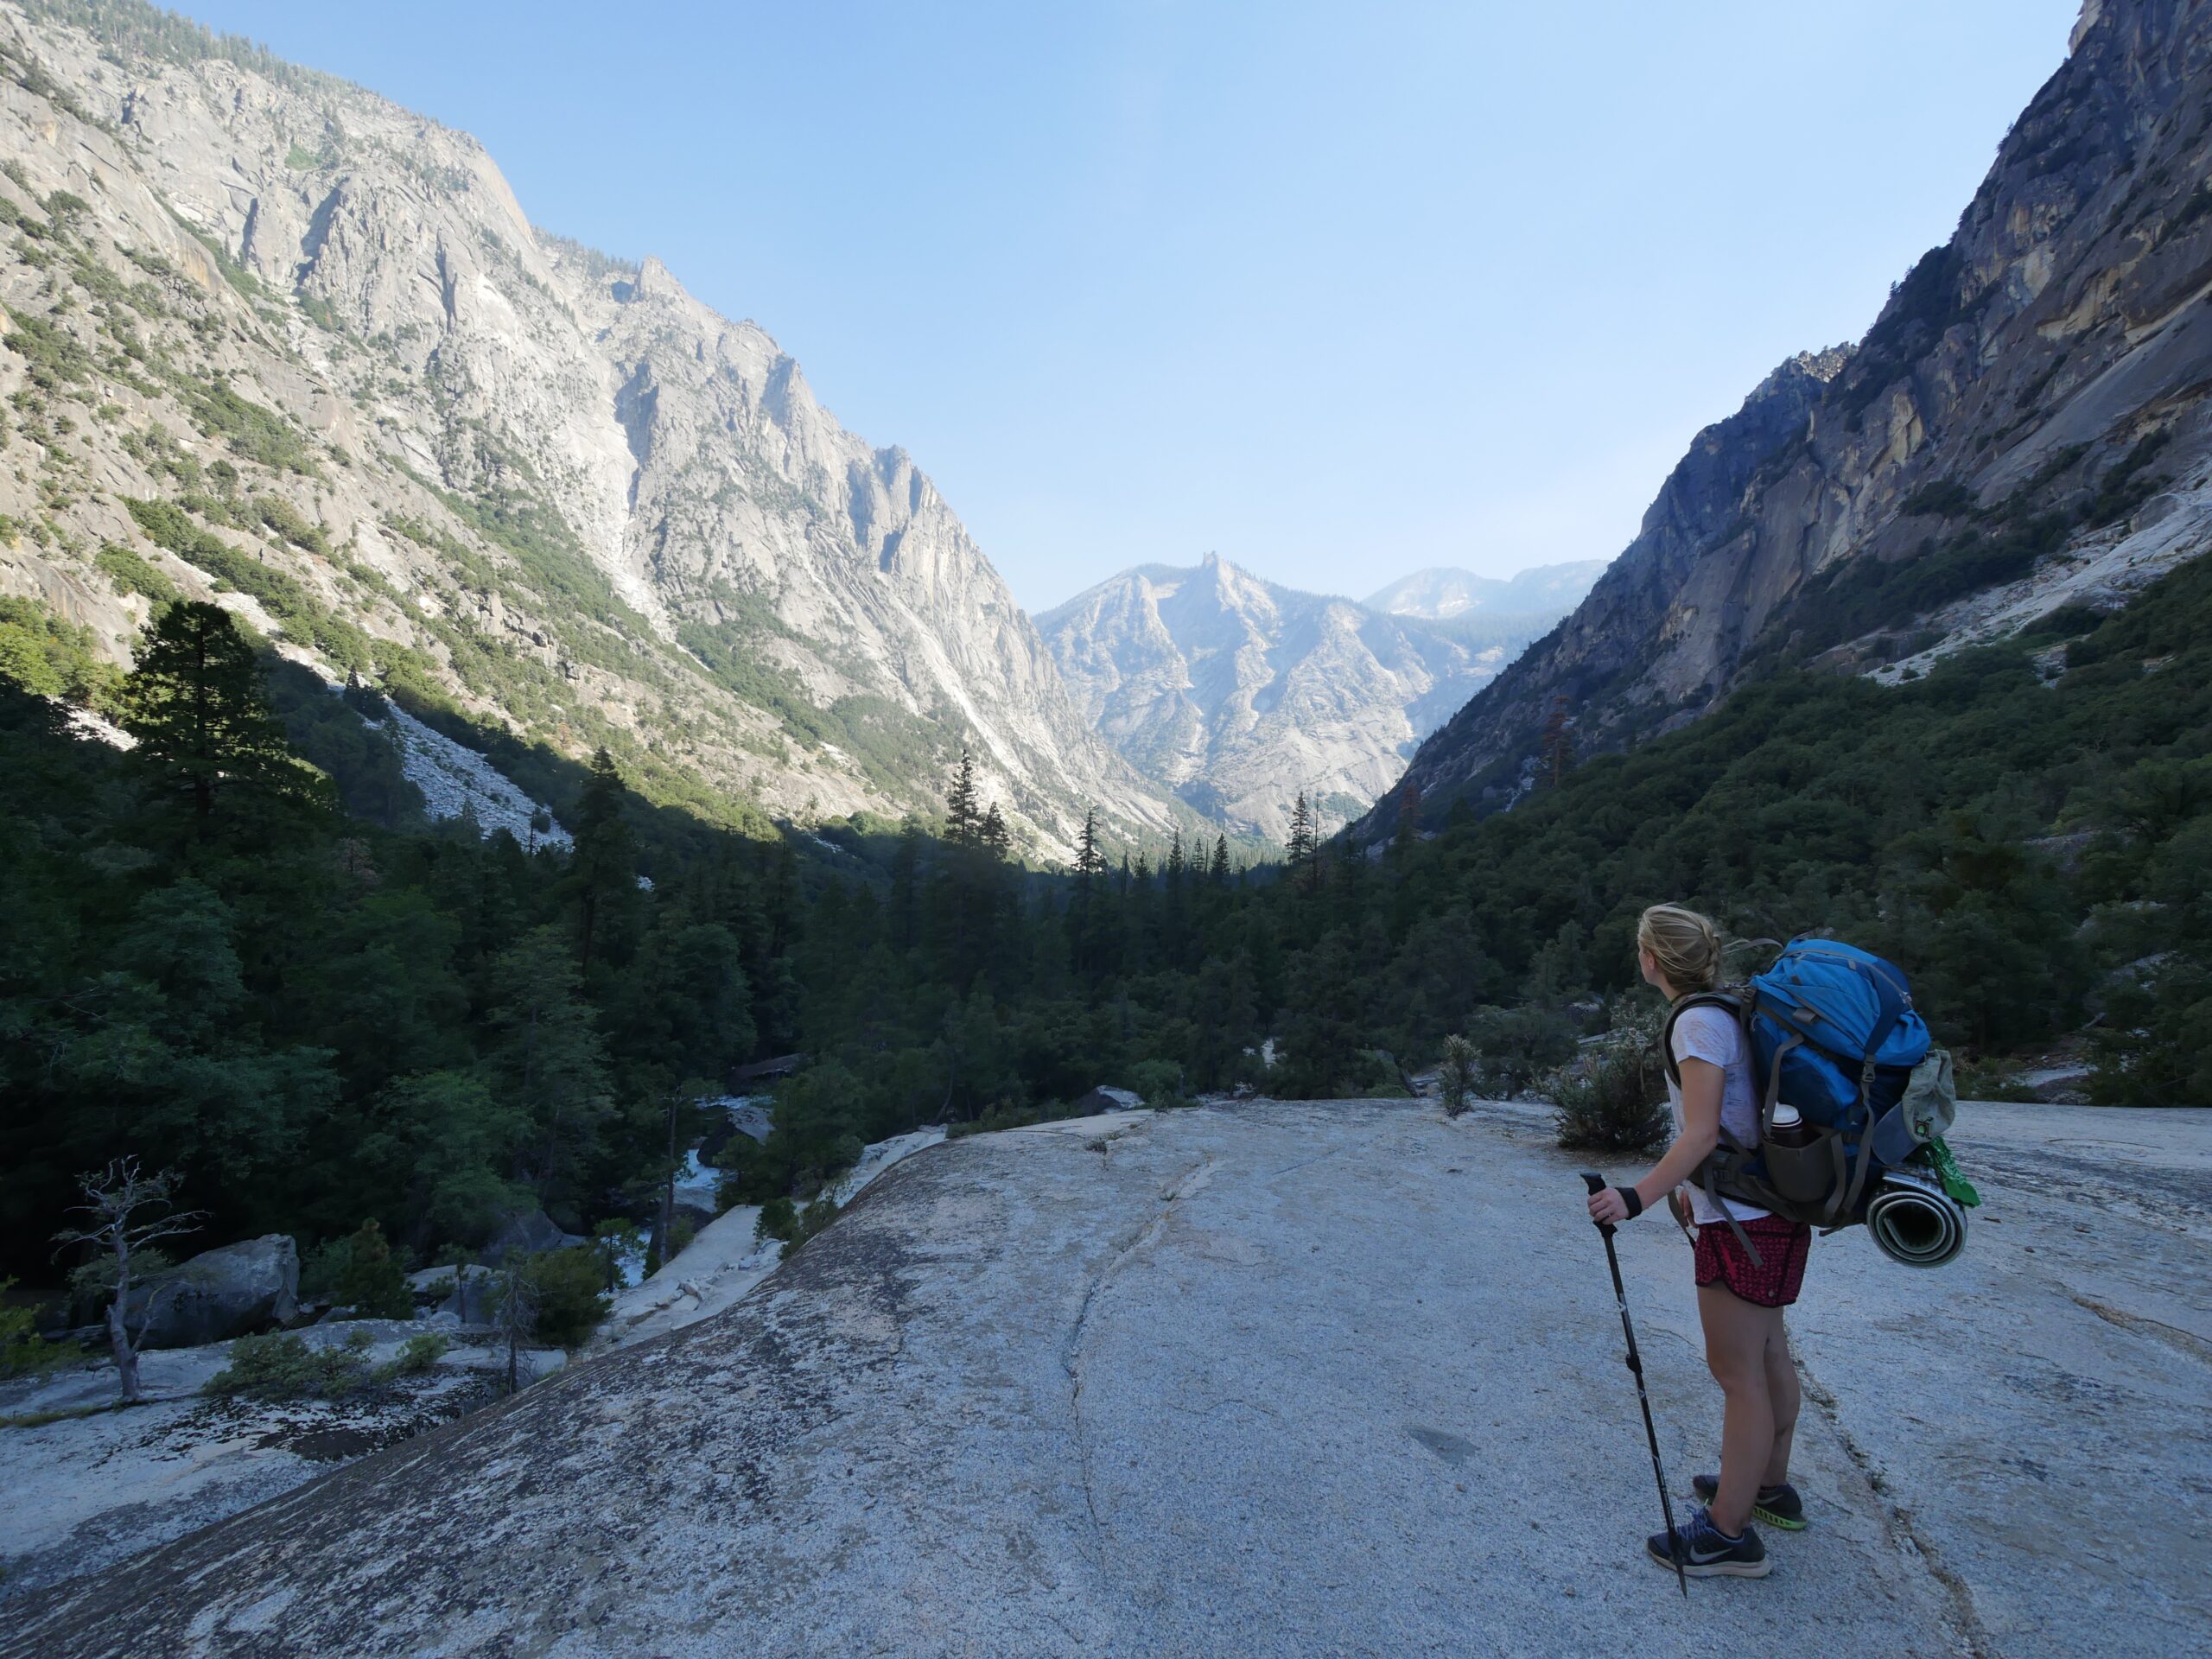 A hiker looks at a view of mountains in Paradise Valley, Kings Canyon National Park, California.